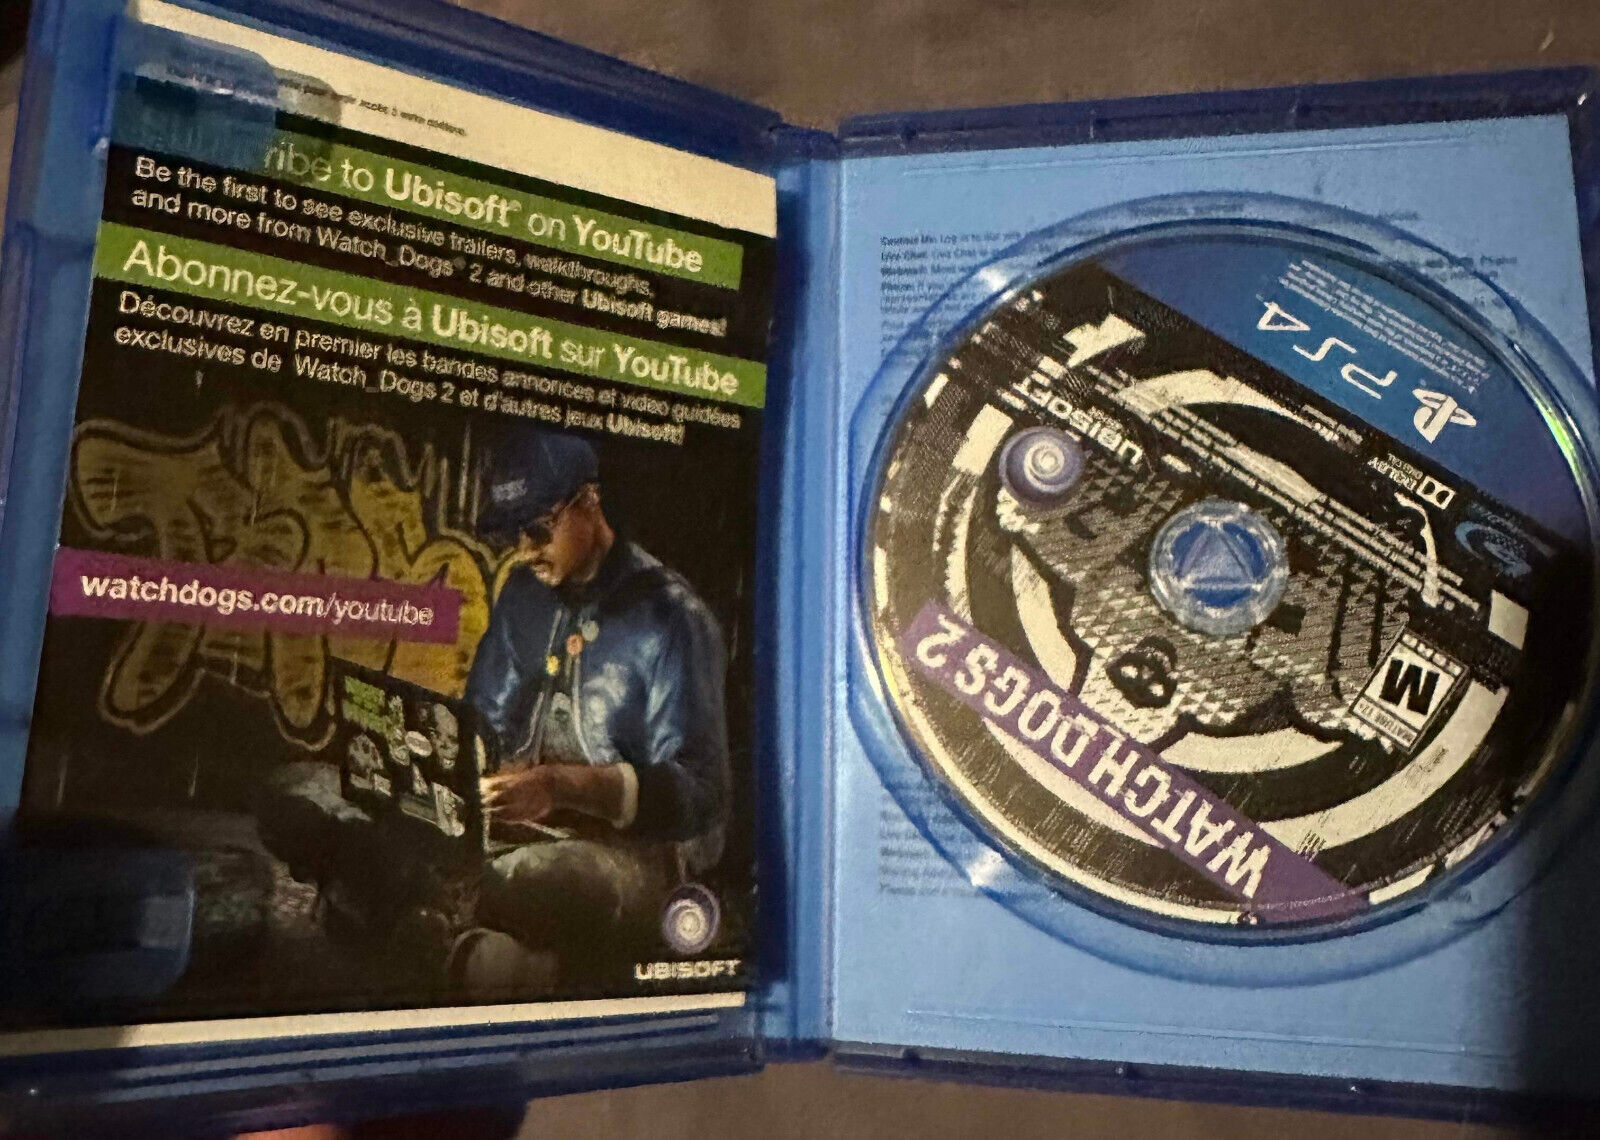 Watch Dogs 2, Deluxe Edition (Sony PlayStation 4, PS4)